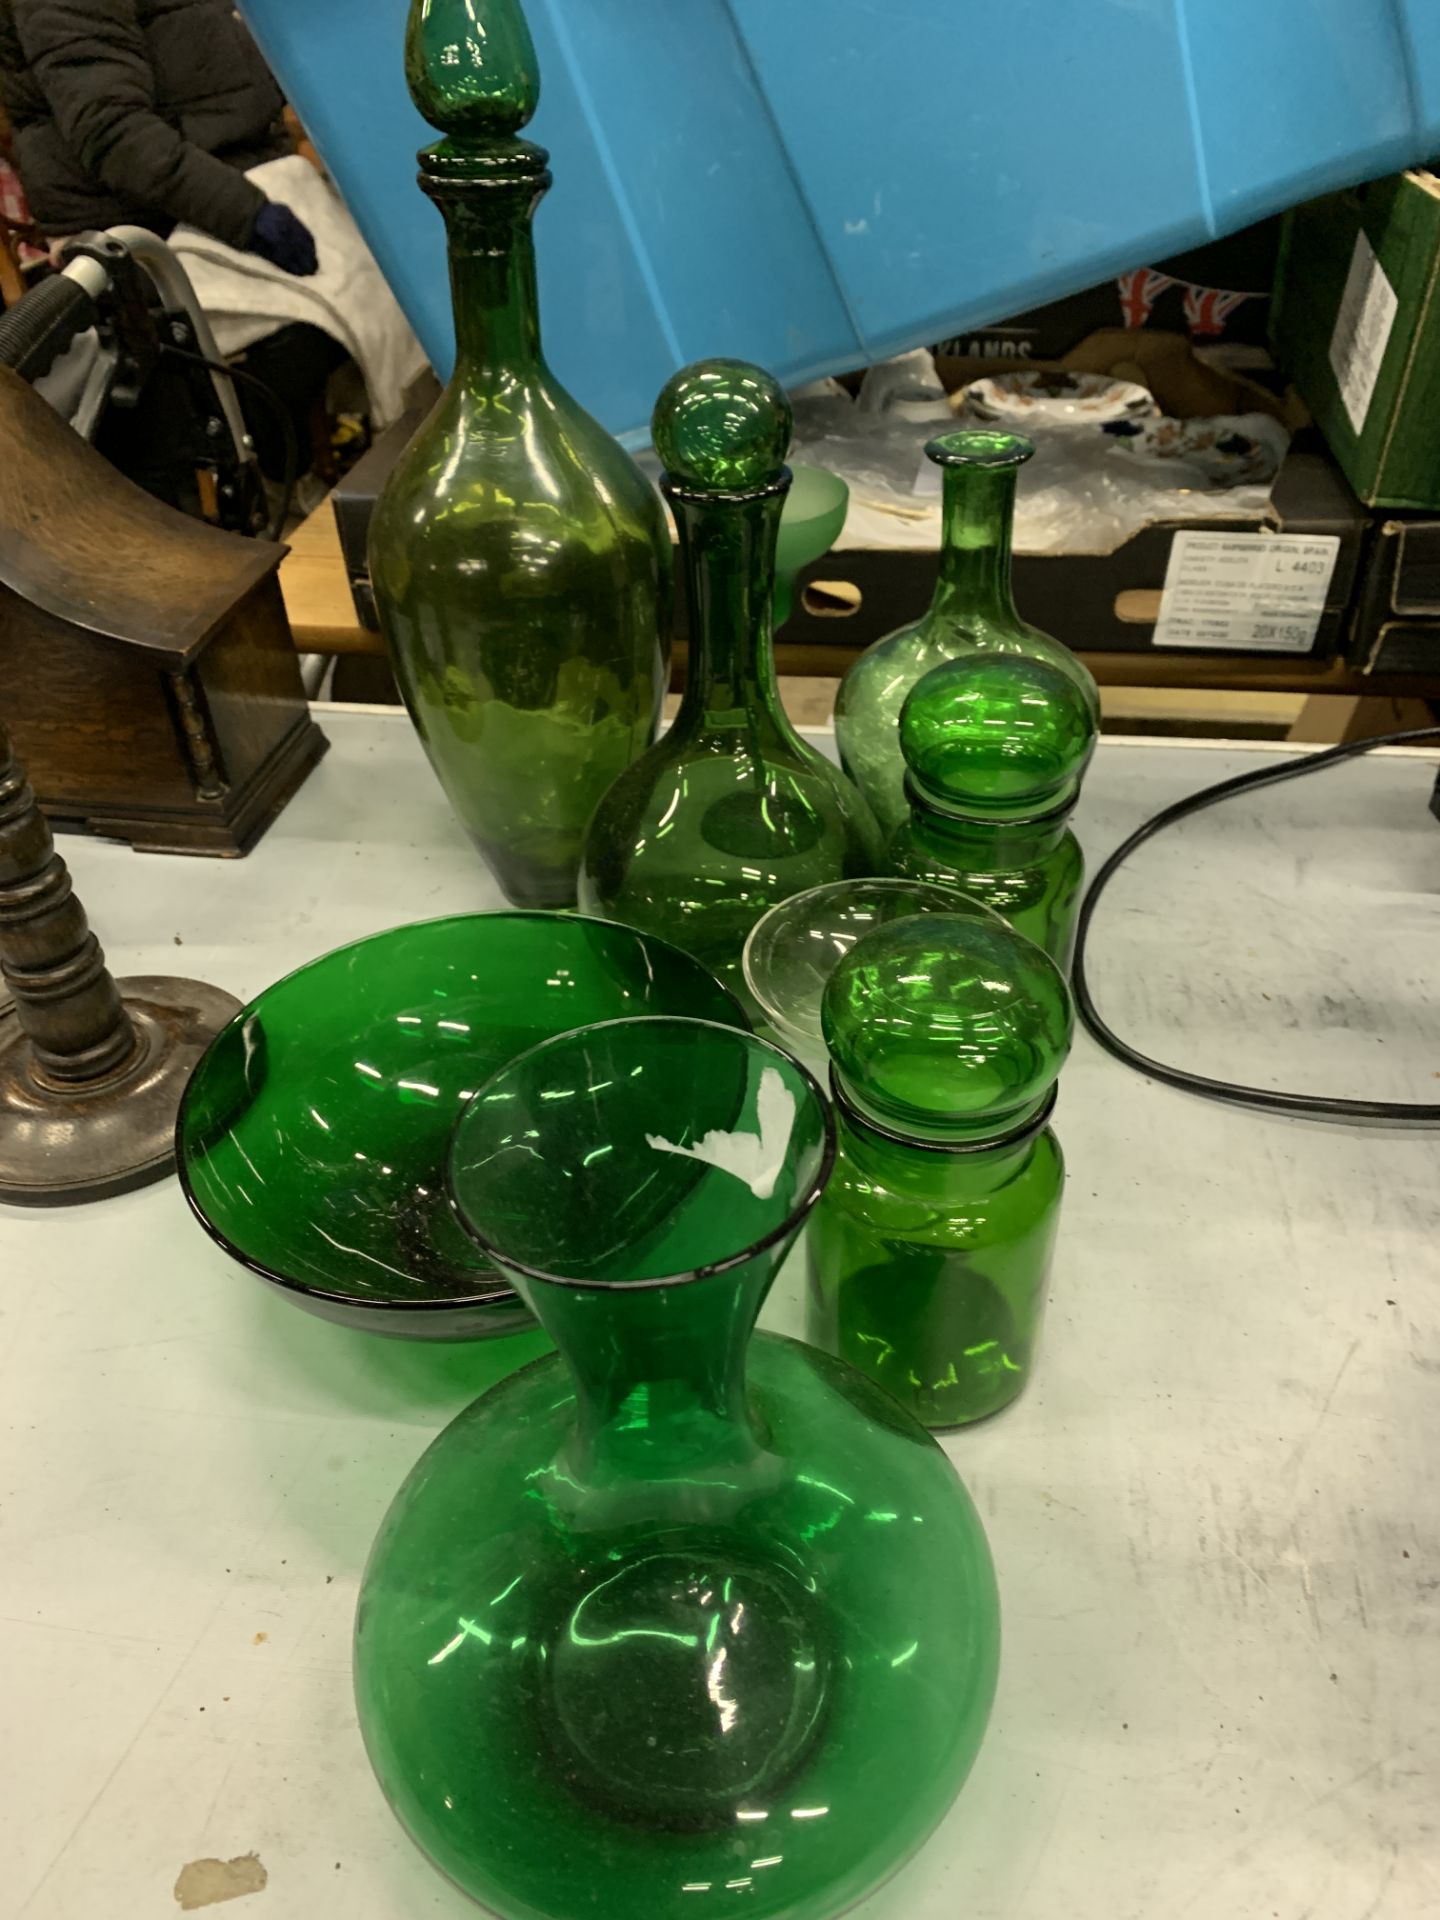 Quantity decorative green glass ware including two decanters. - Image 2 of 3